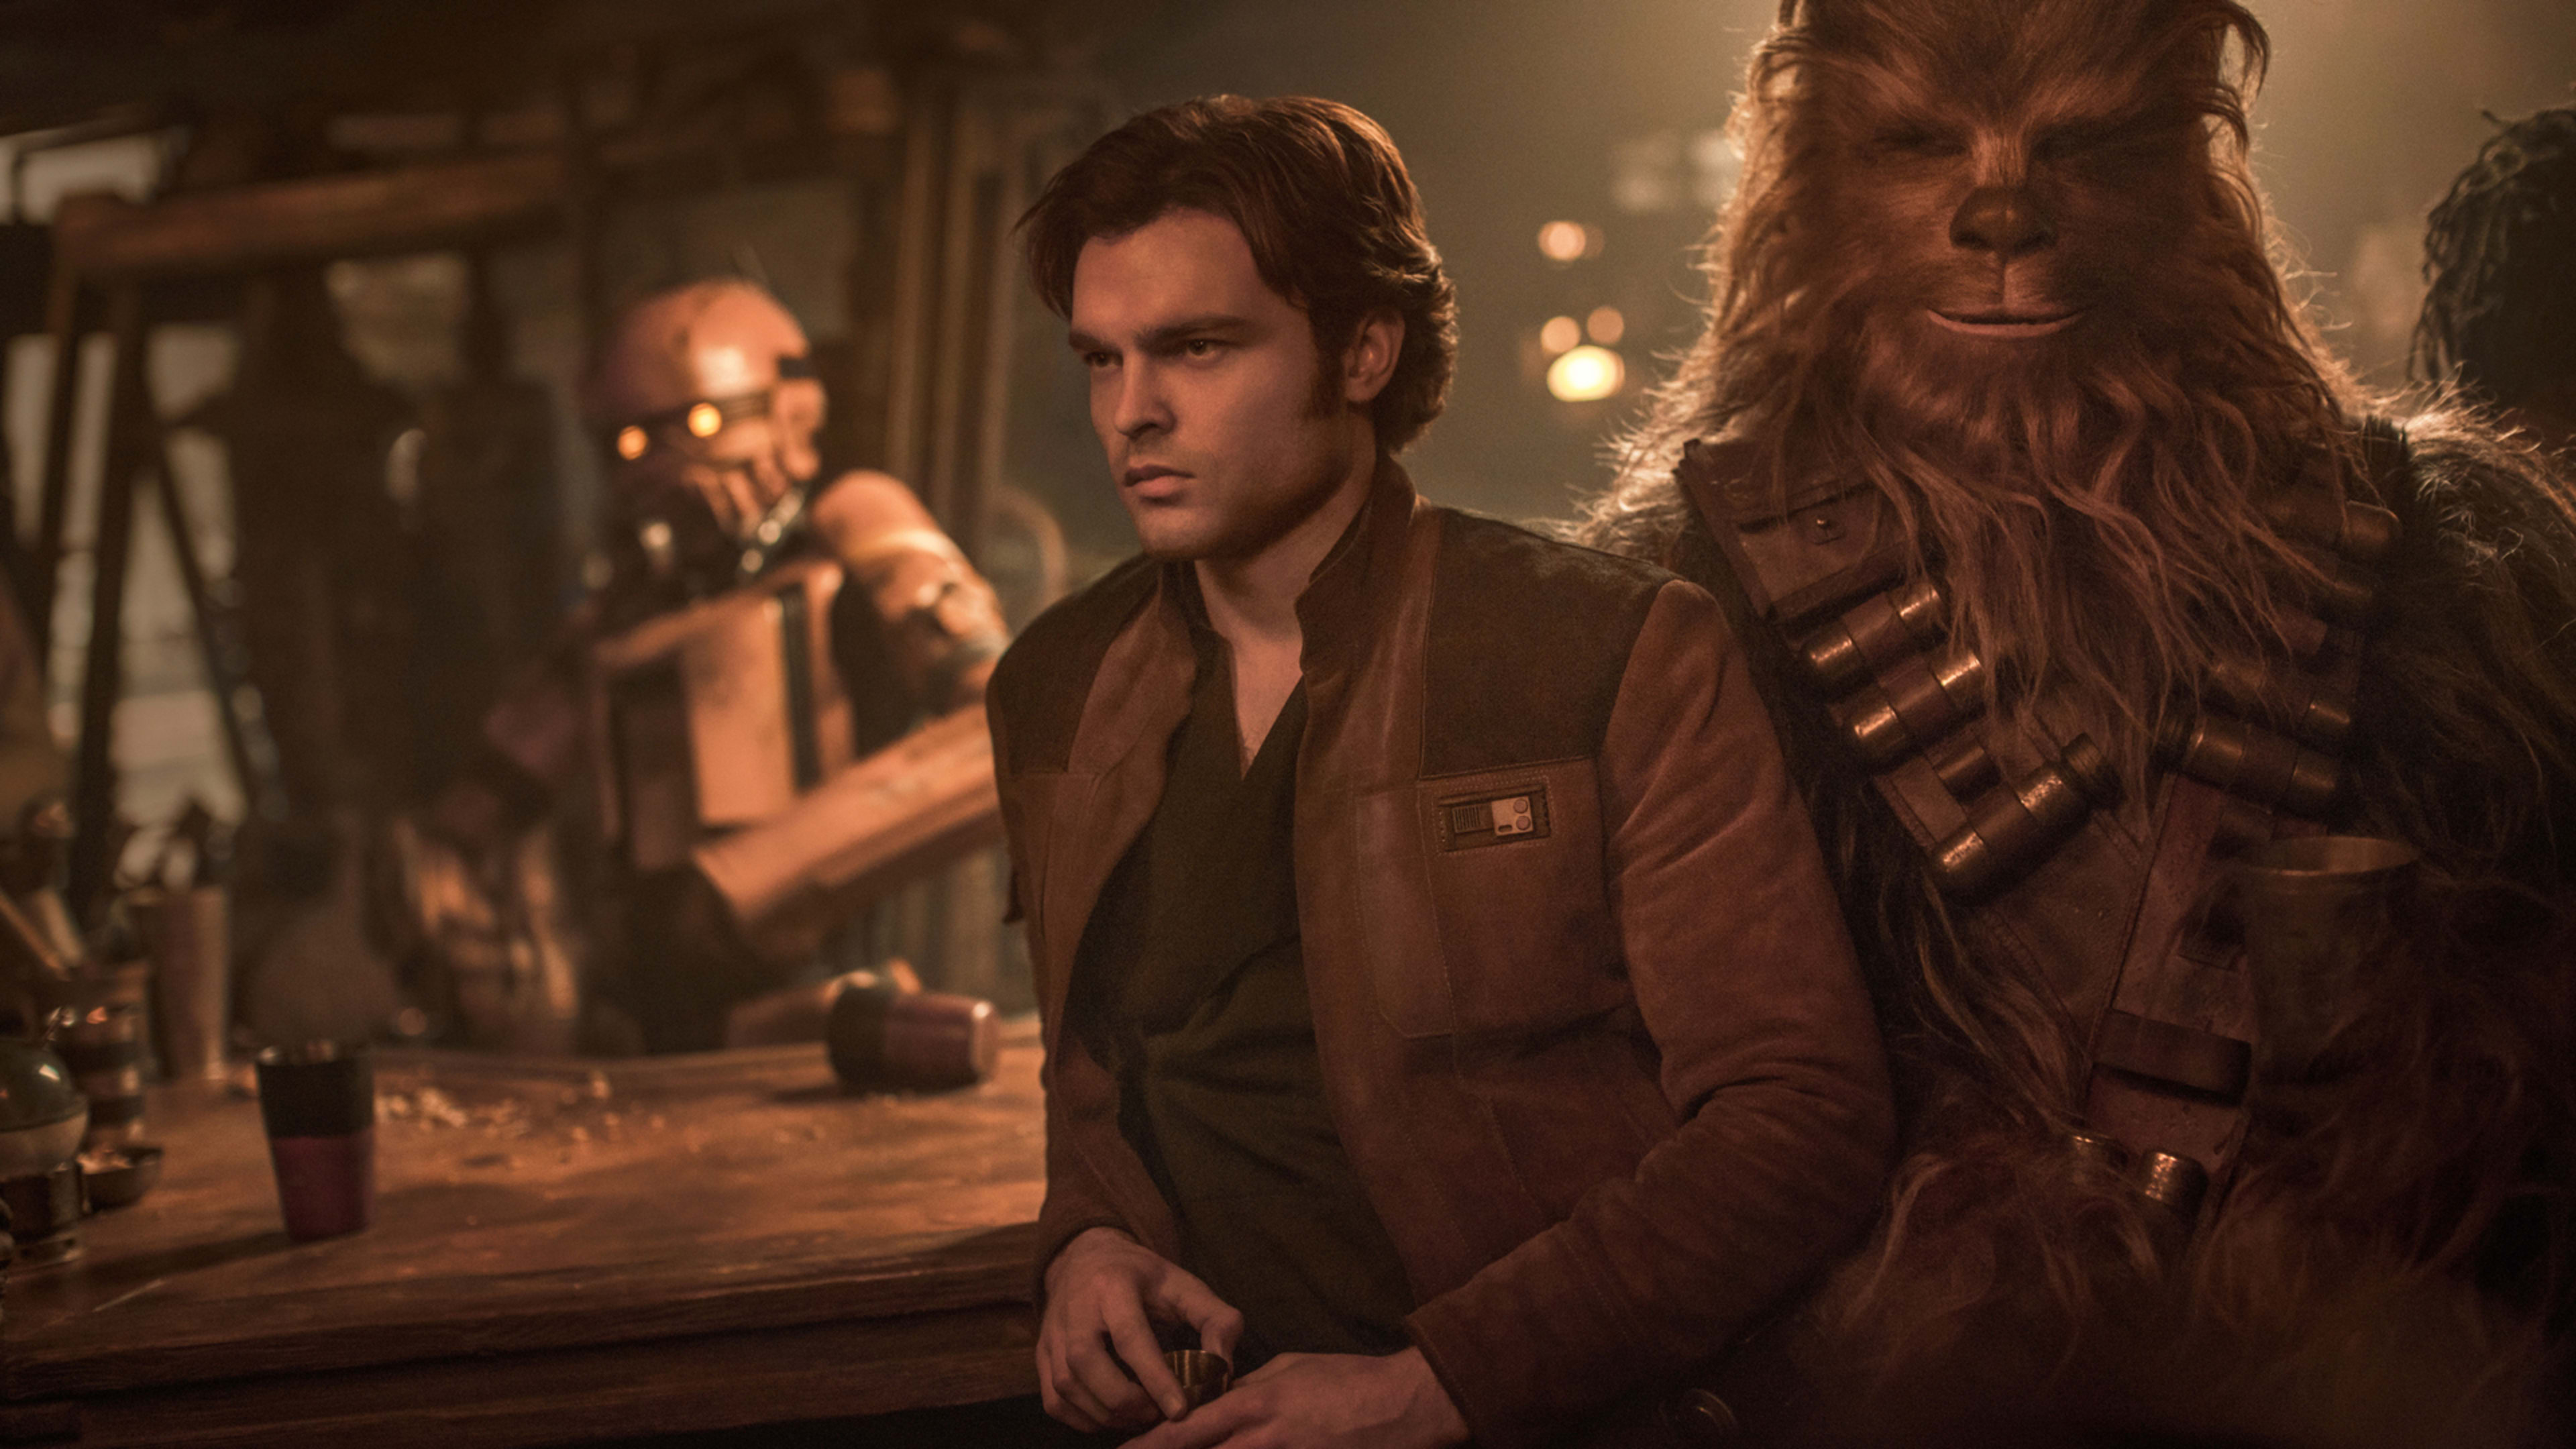 What critics are saying about “Solo: A Star Wars Story” so far